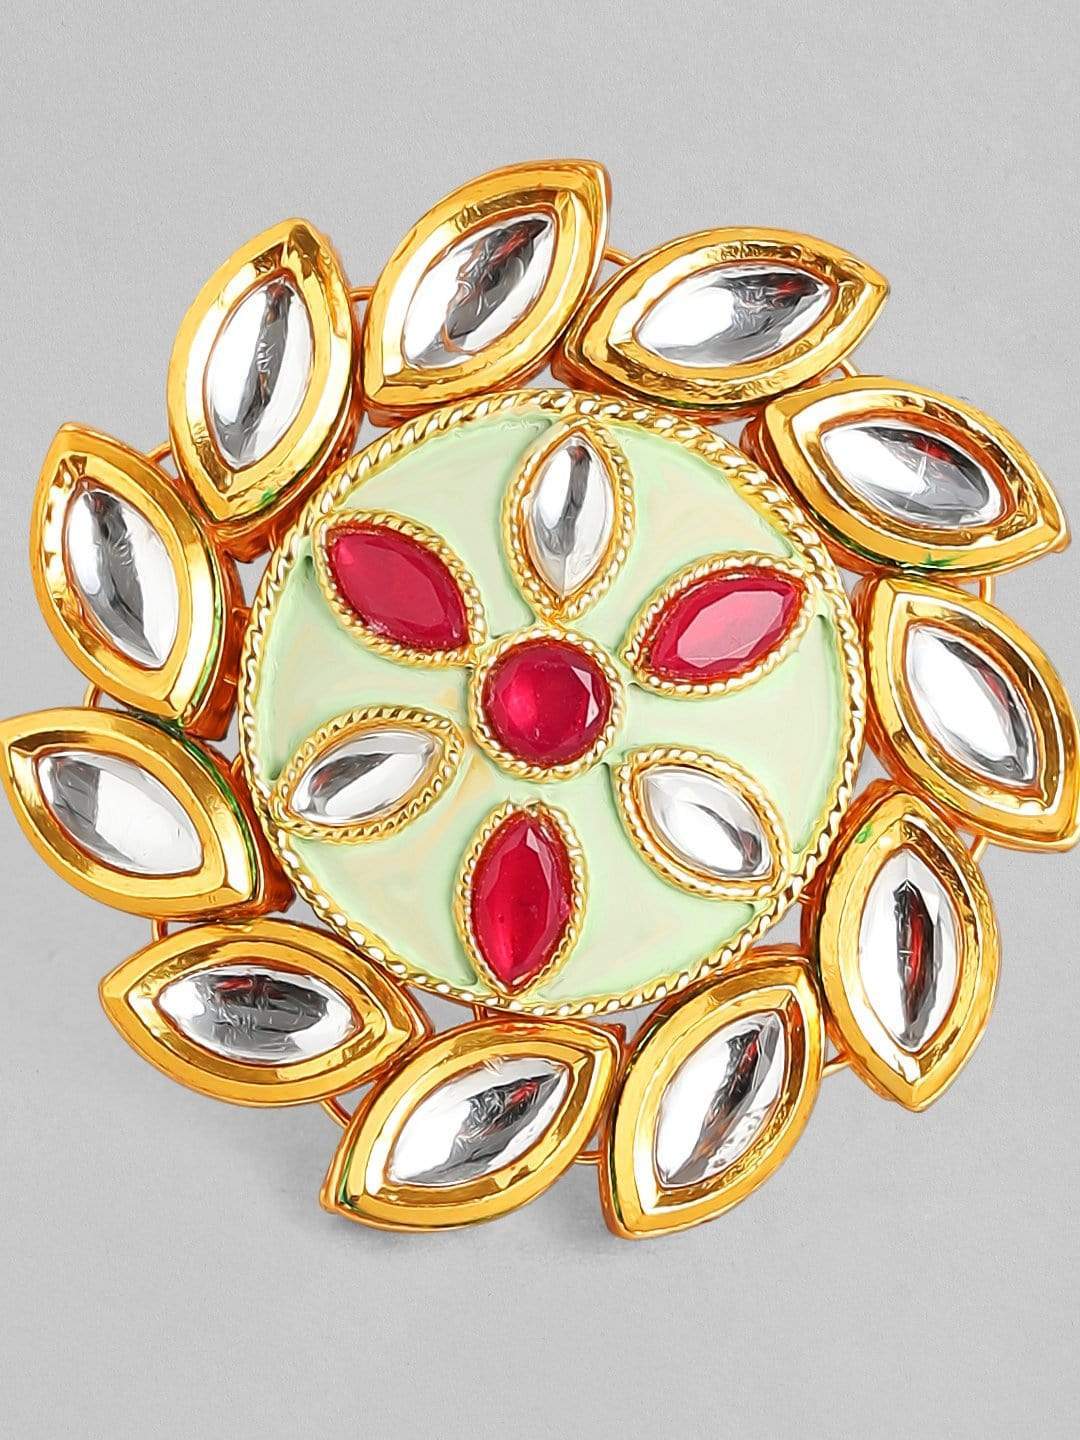 Rubans 24K Gold Plated Kundan with Mint Green Enamel Handcrafted Finger Ring Rings